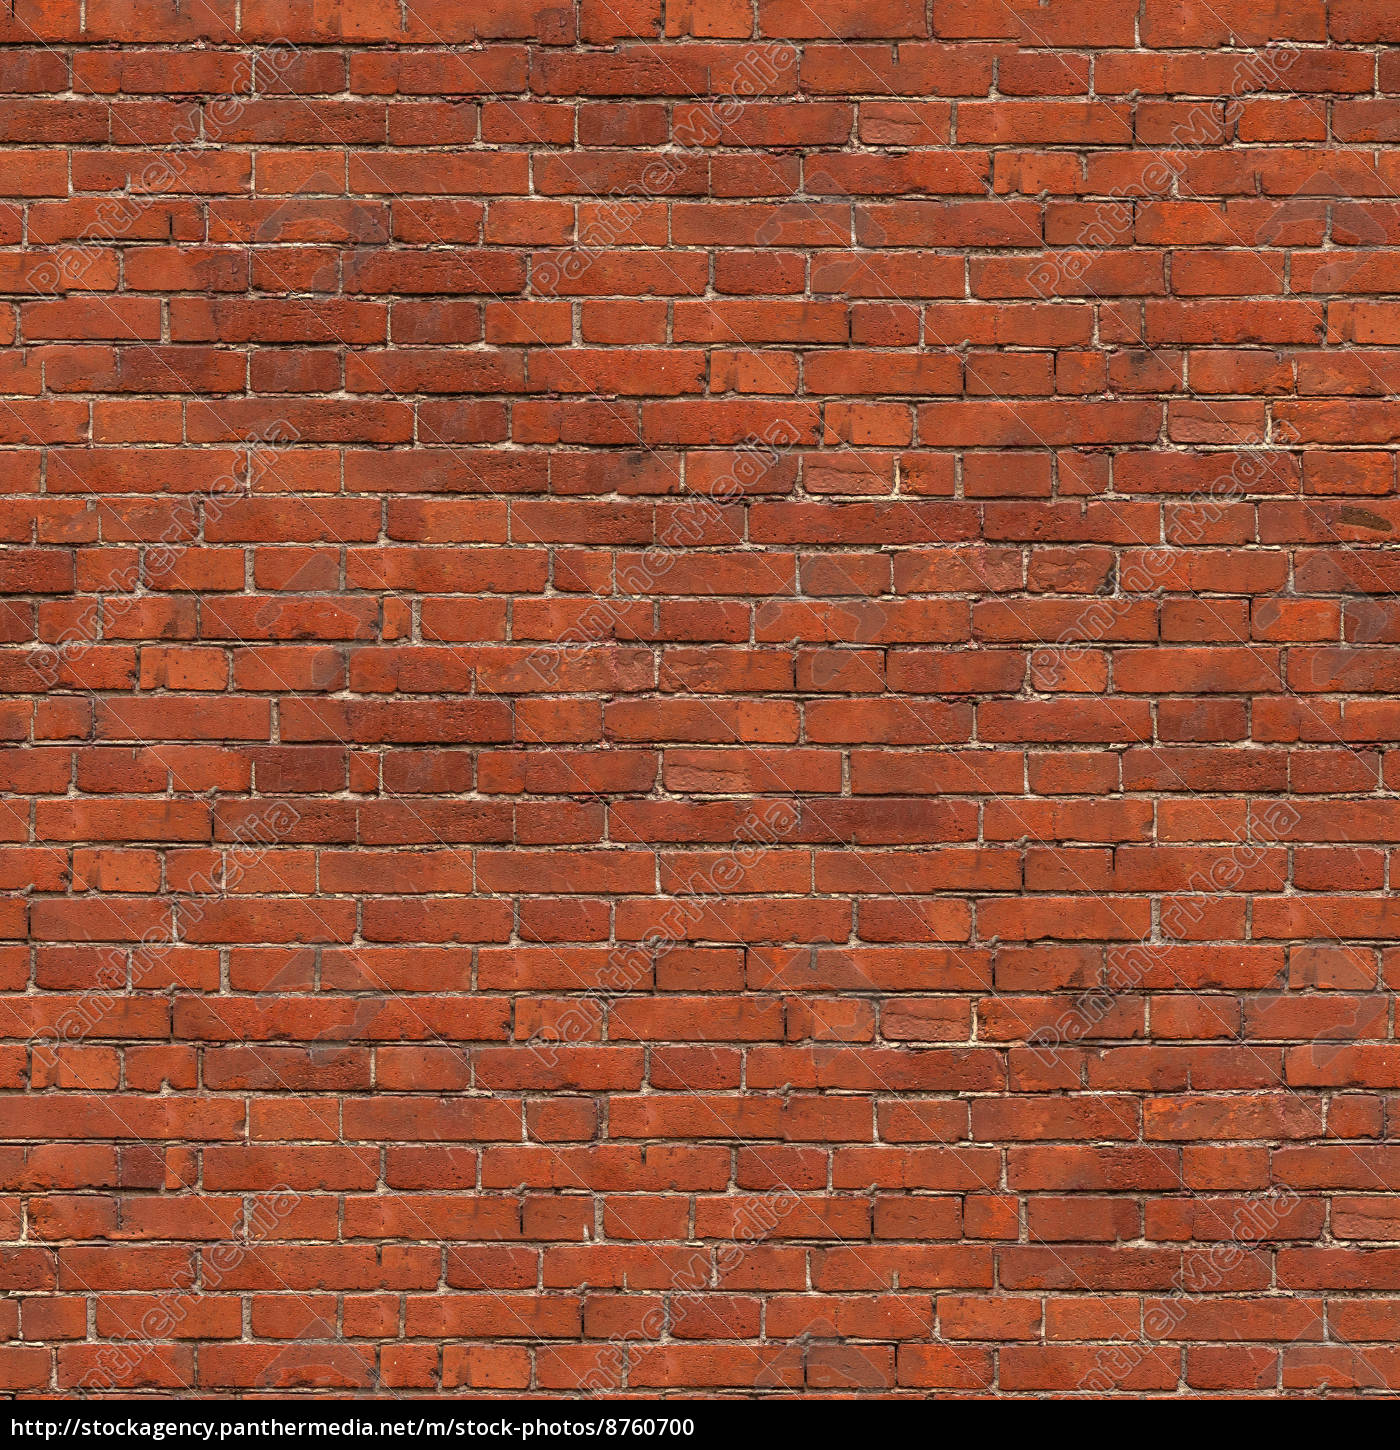 Background Of Brick Wall Texture Royalty Free Photo 8760700 Panthermedia Stock Agency